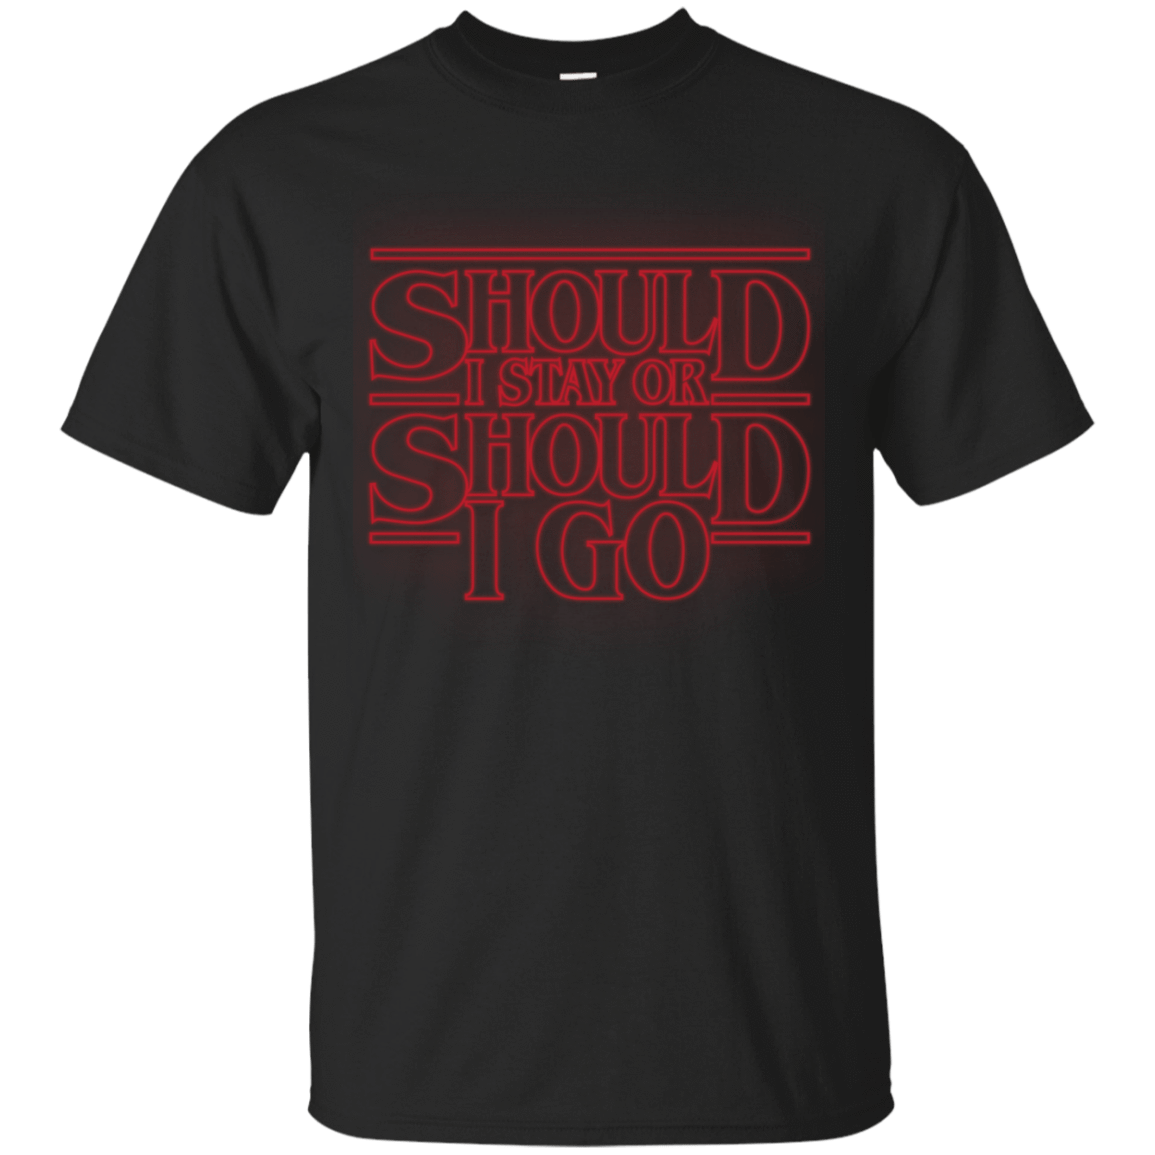 T-Shirts Black / Small Should I Stay Or Should I Go T-Shirt